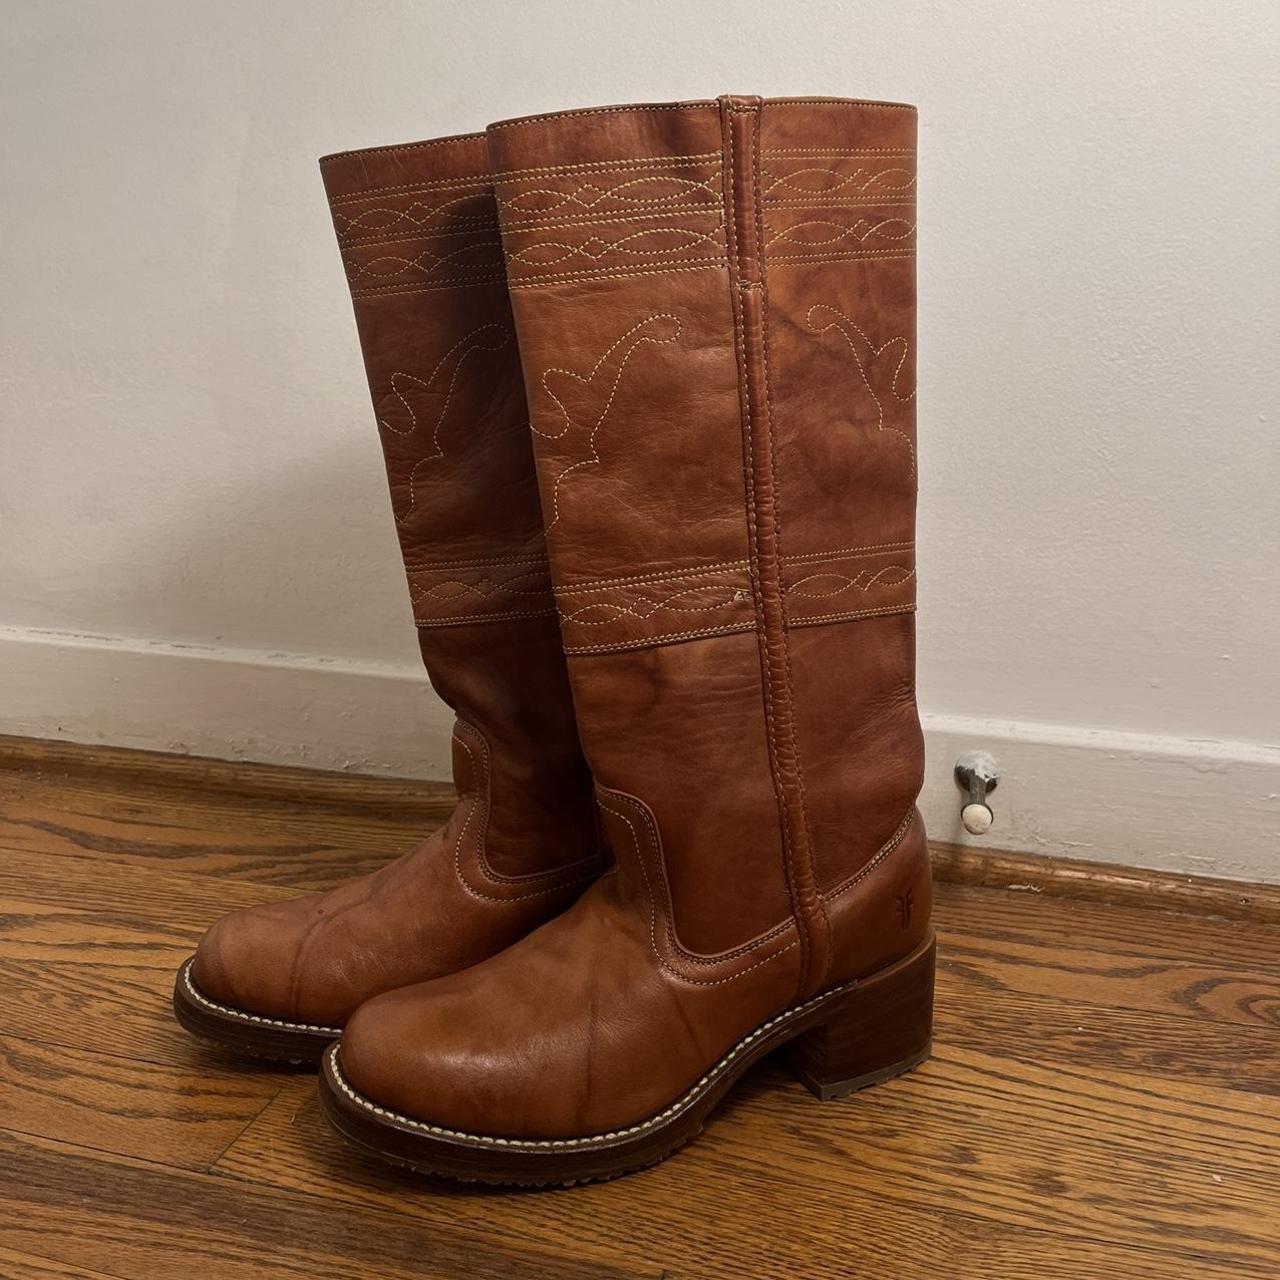 Frye Women's Brown and Gold Boots